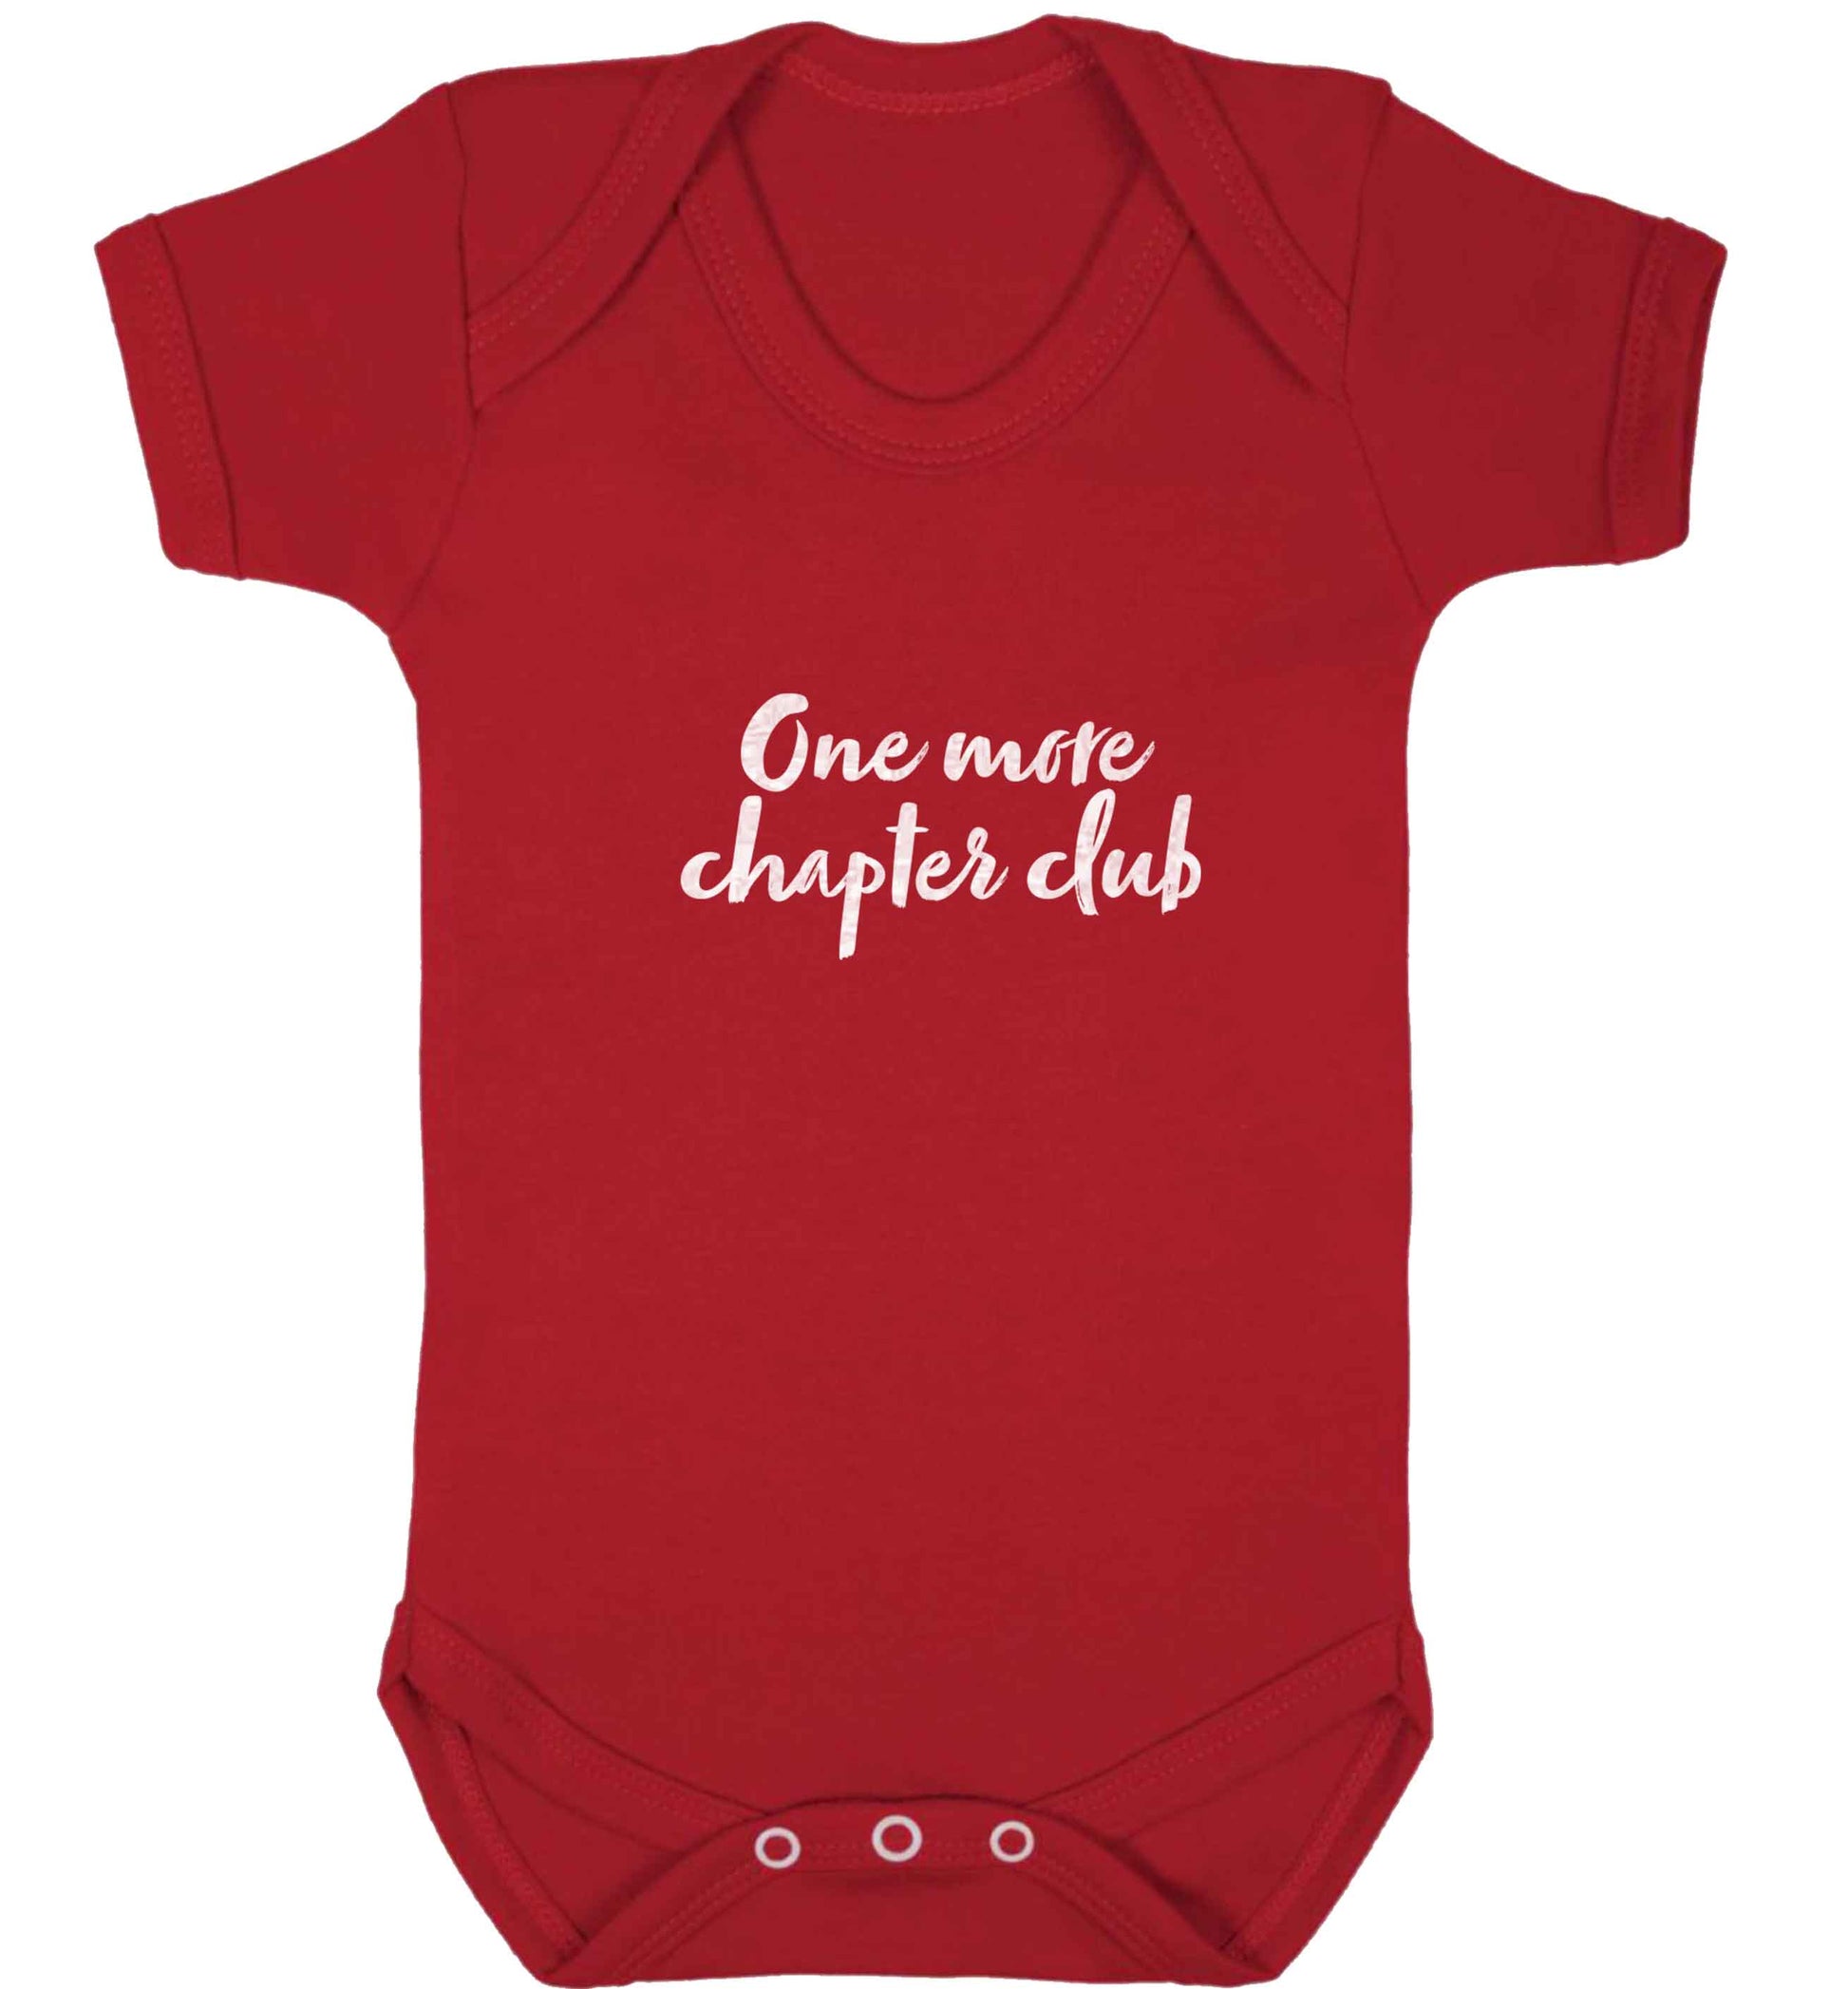 One more chapter club Kit baby vest red 18-24 months